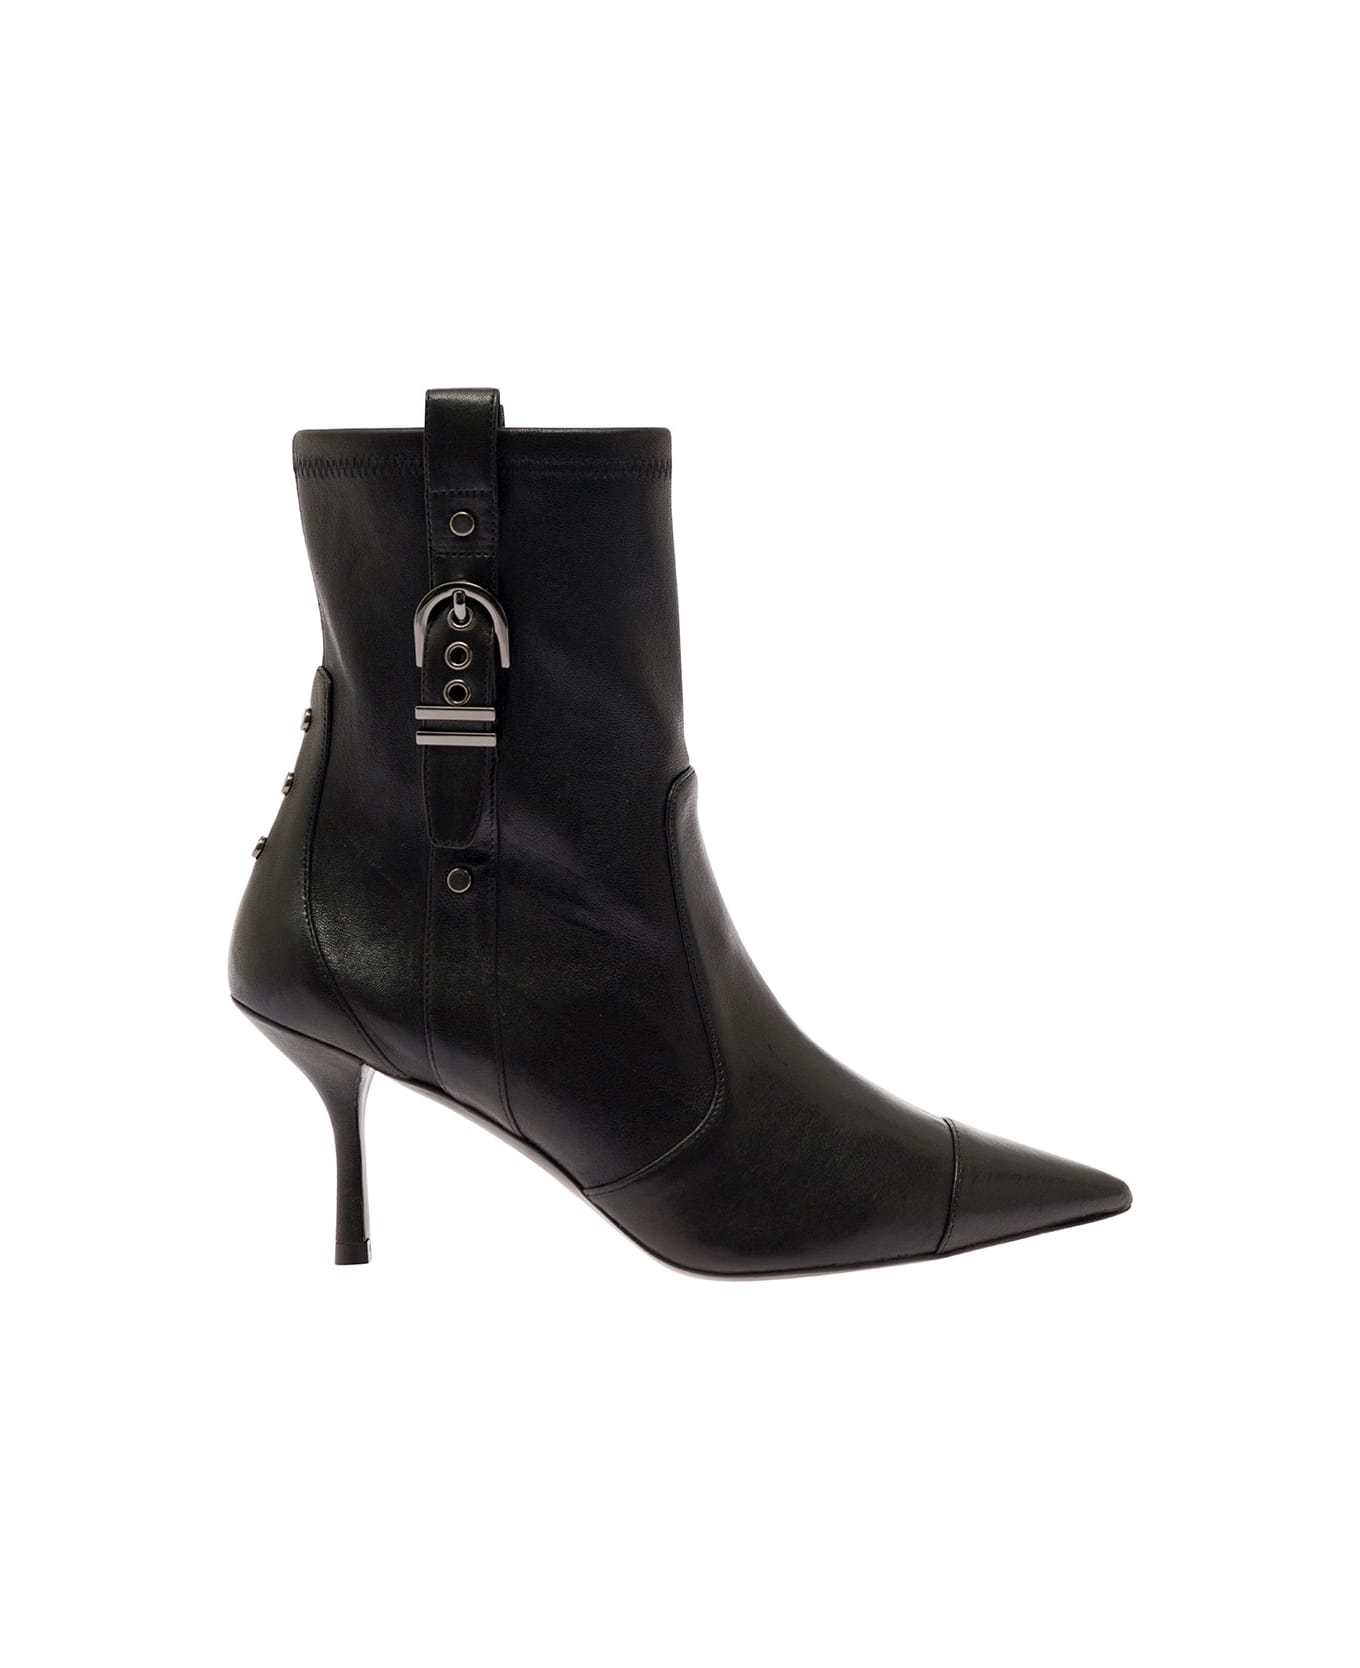 Stuart Weitzman Black Bootie With Buckle Detail And Stiletto Heel In Smooth Leather Woman - Black ブーツ